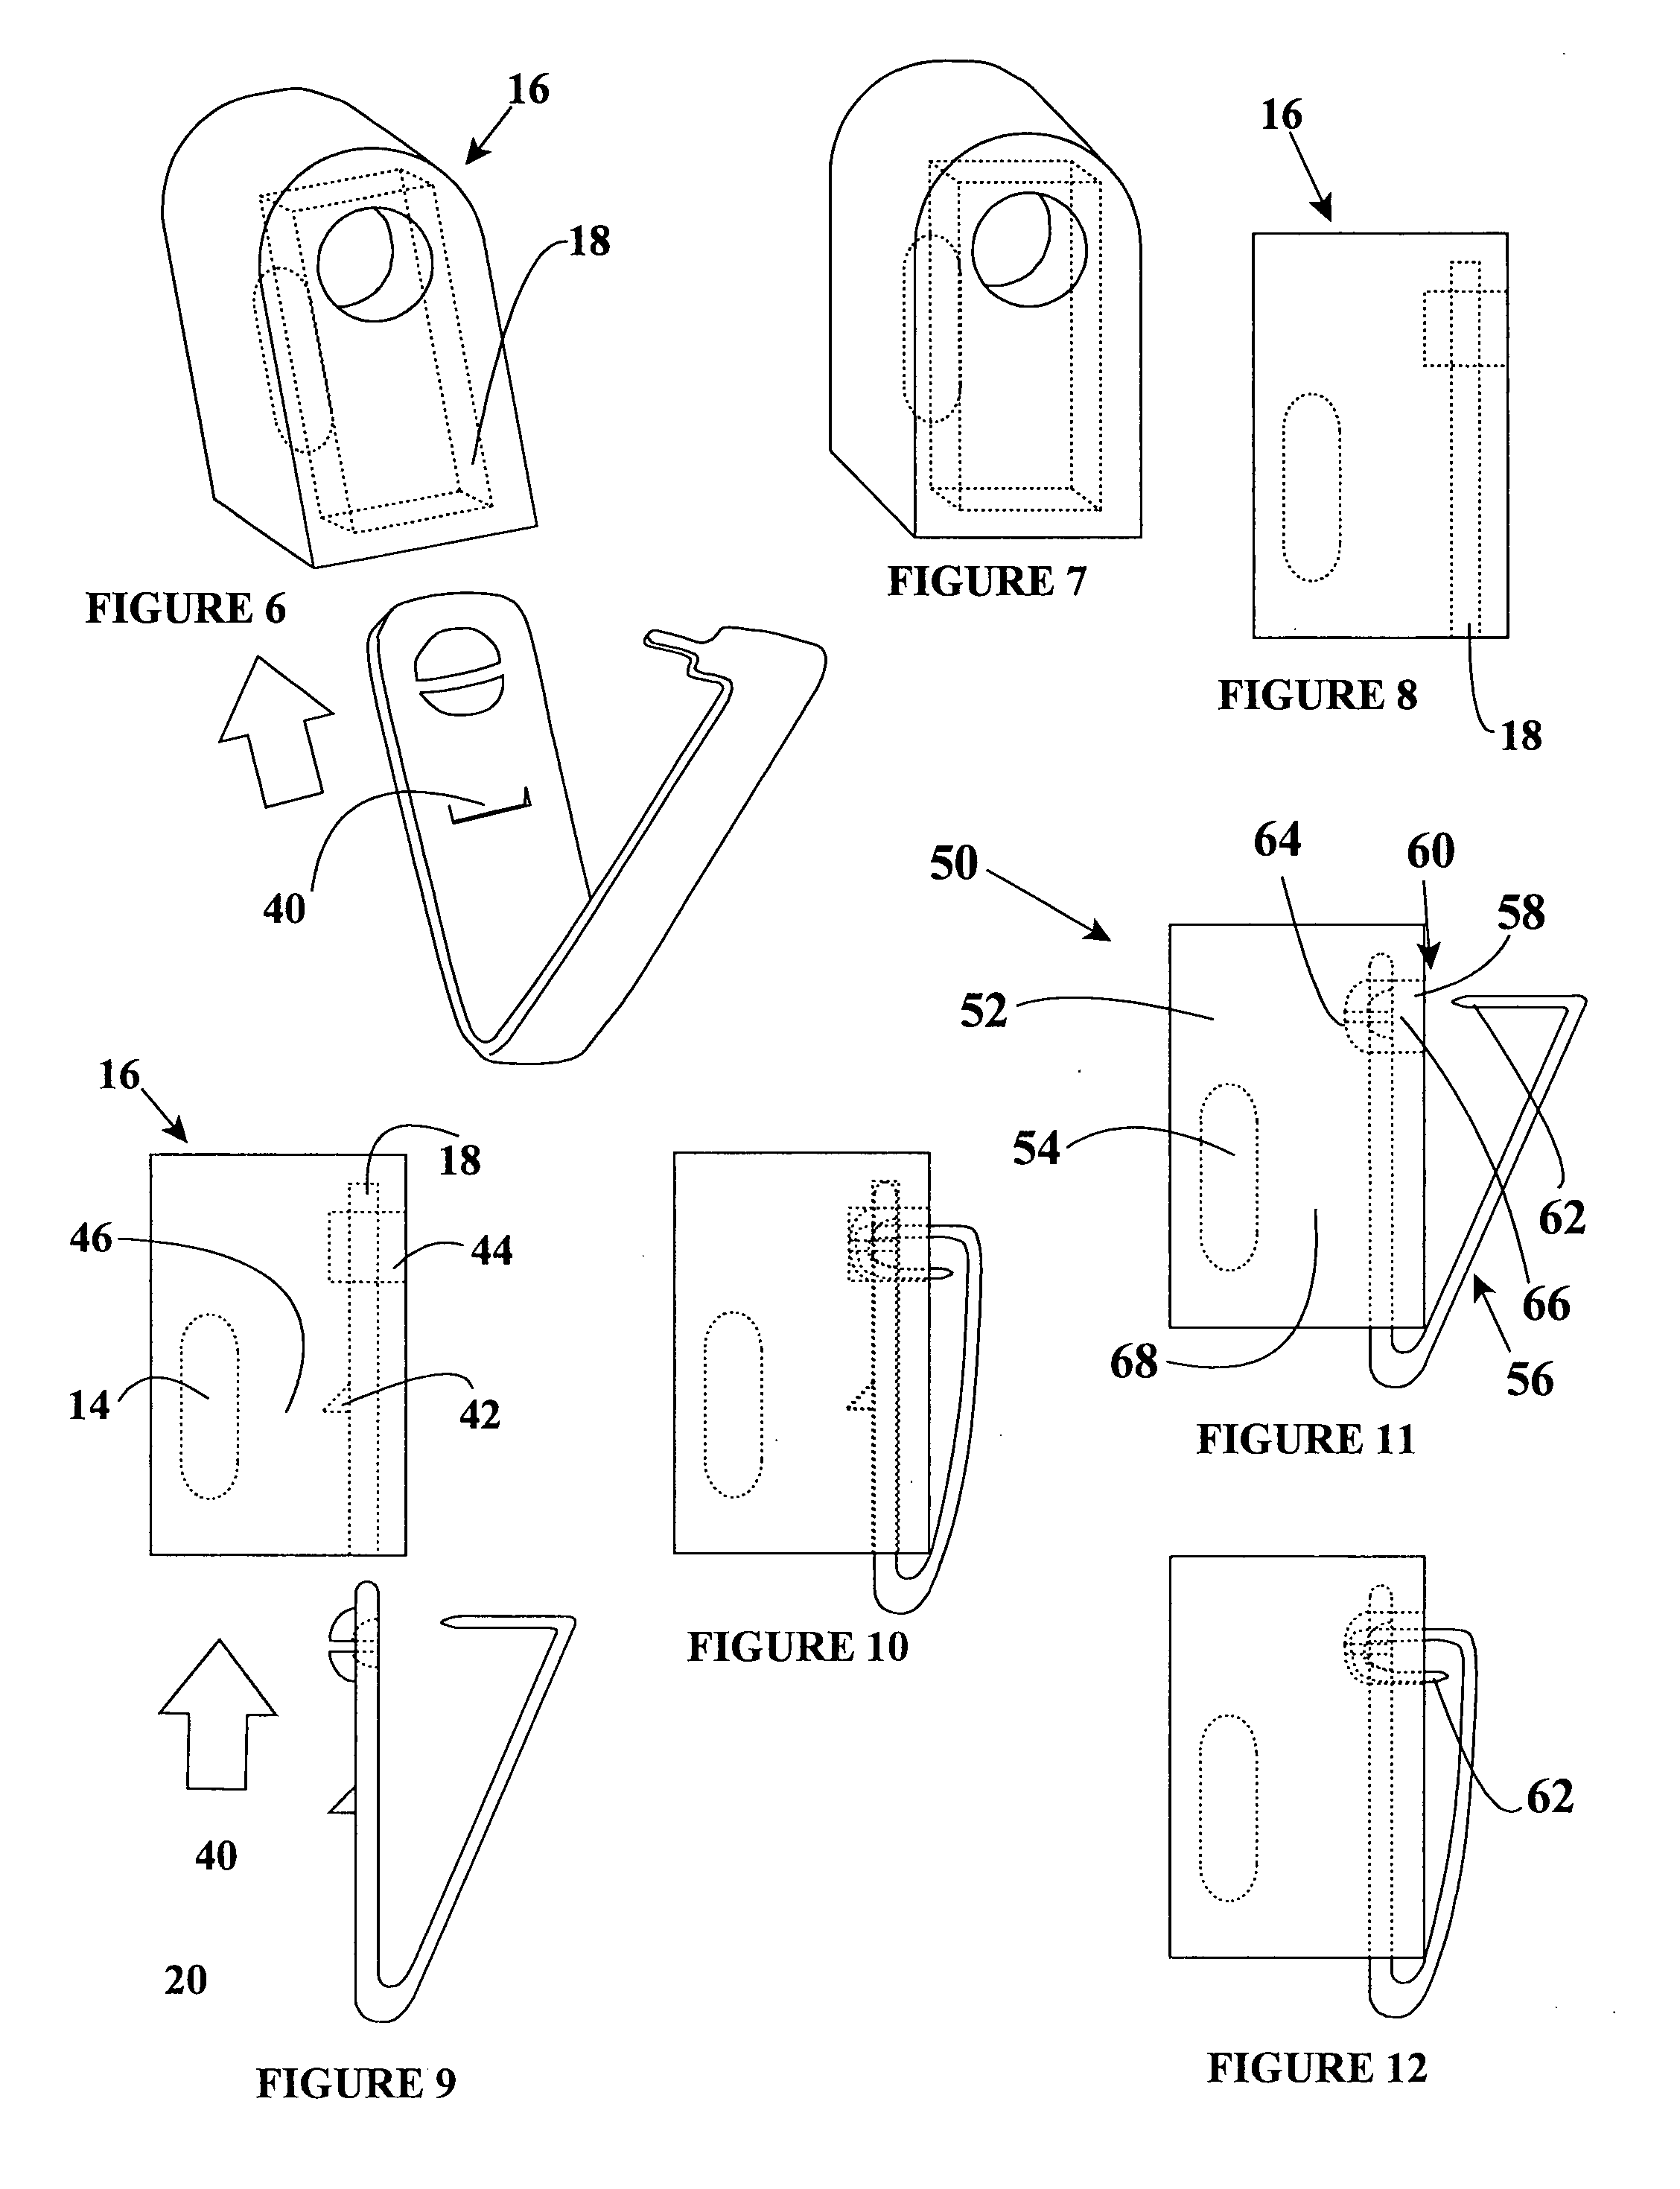 Metal ear tag with electronic identification device